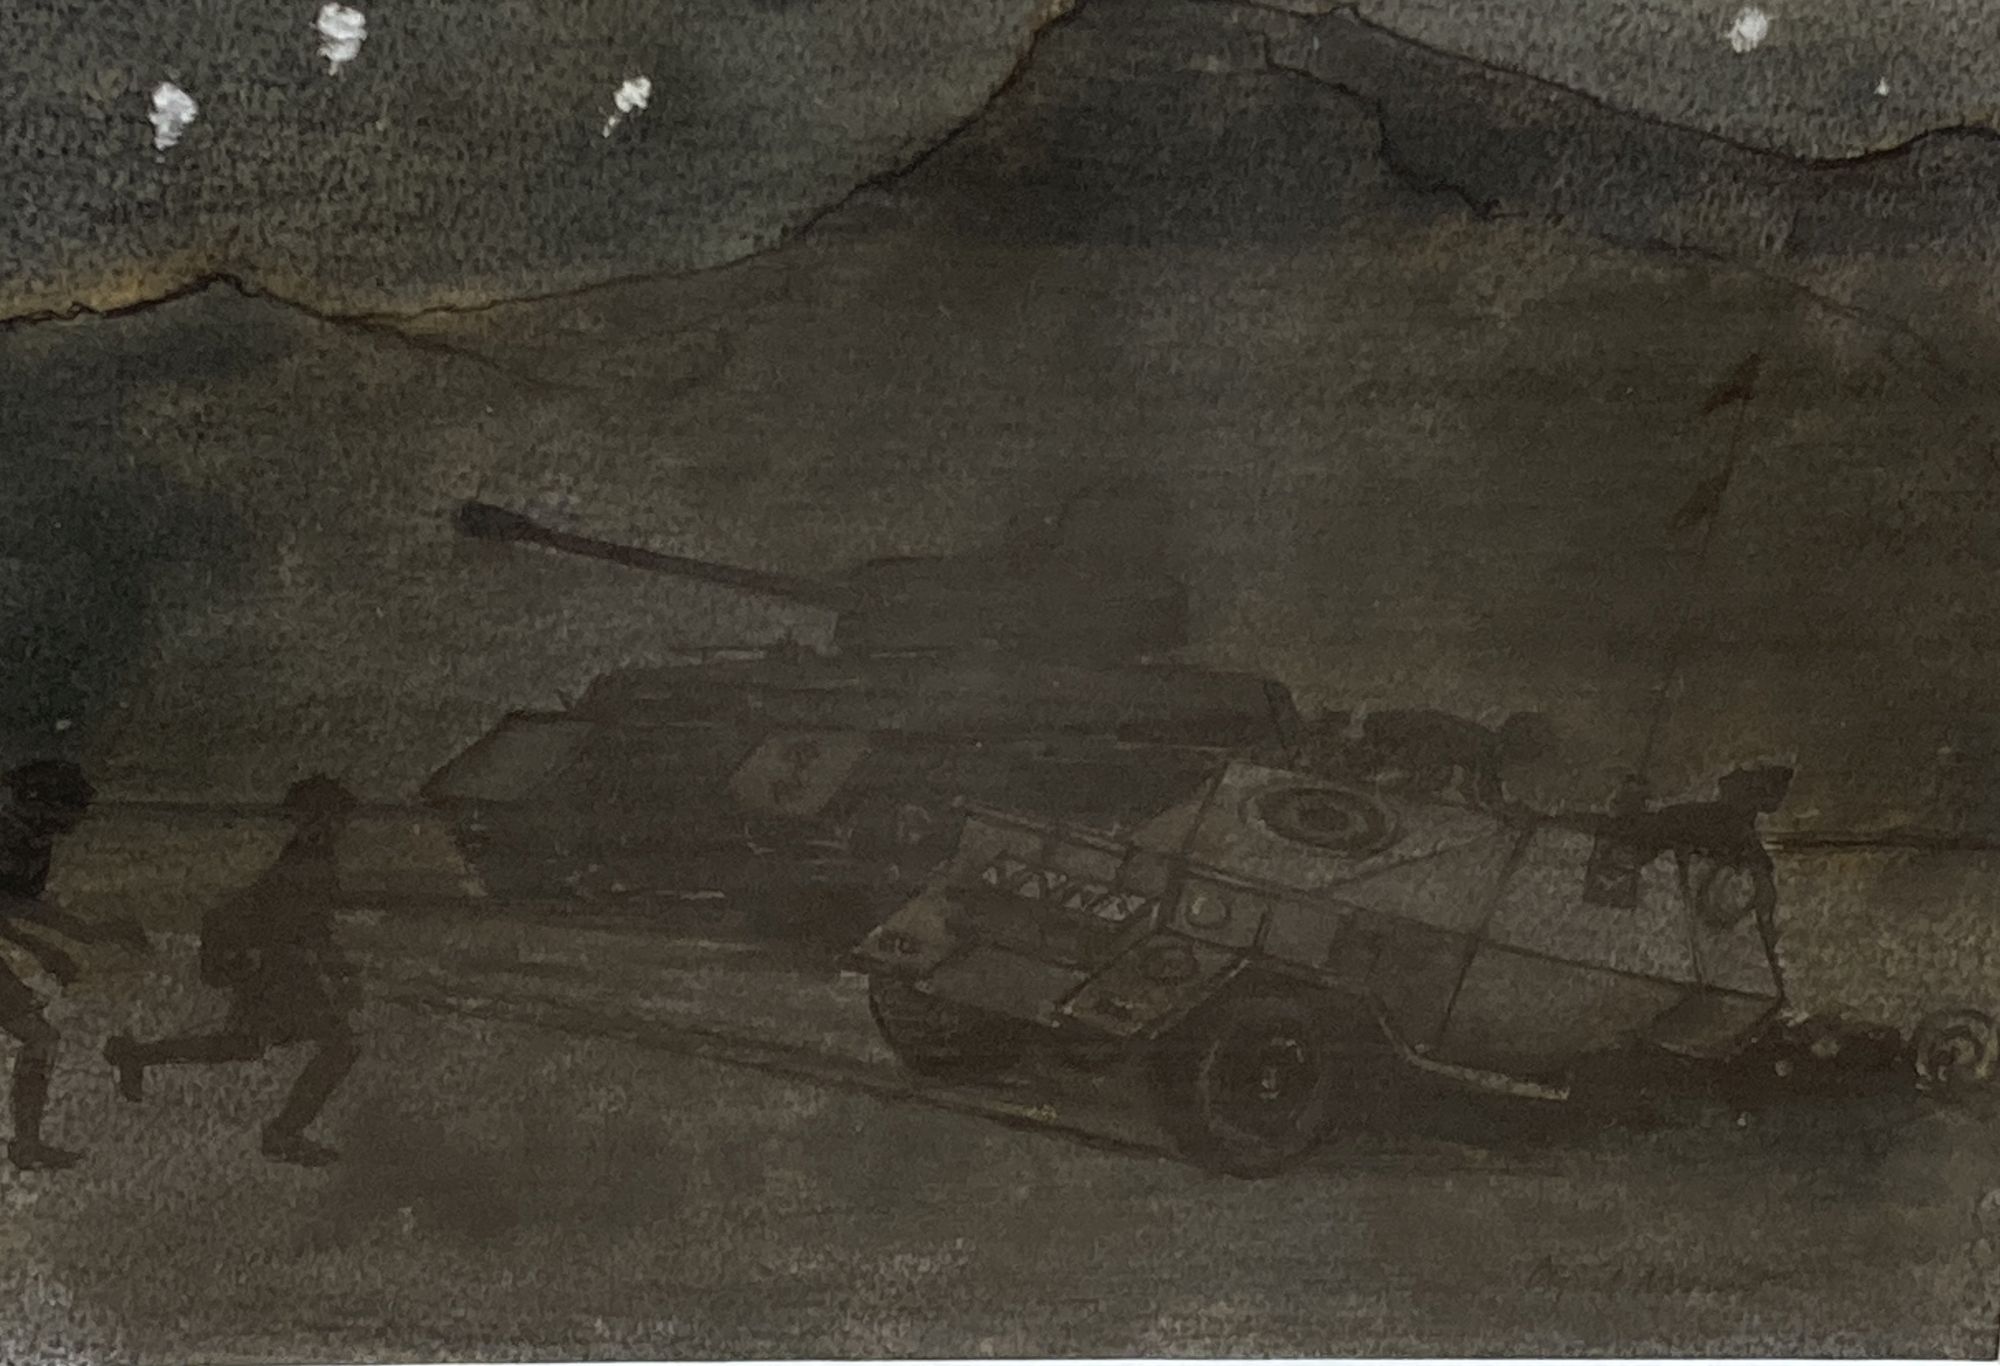 Cyril Mount, ink and wash, Tank and scout car in North Africa 1944, signed, 19 x 26cm